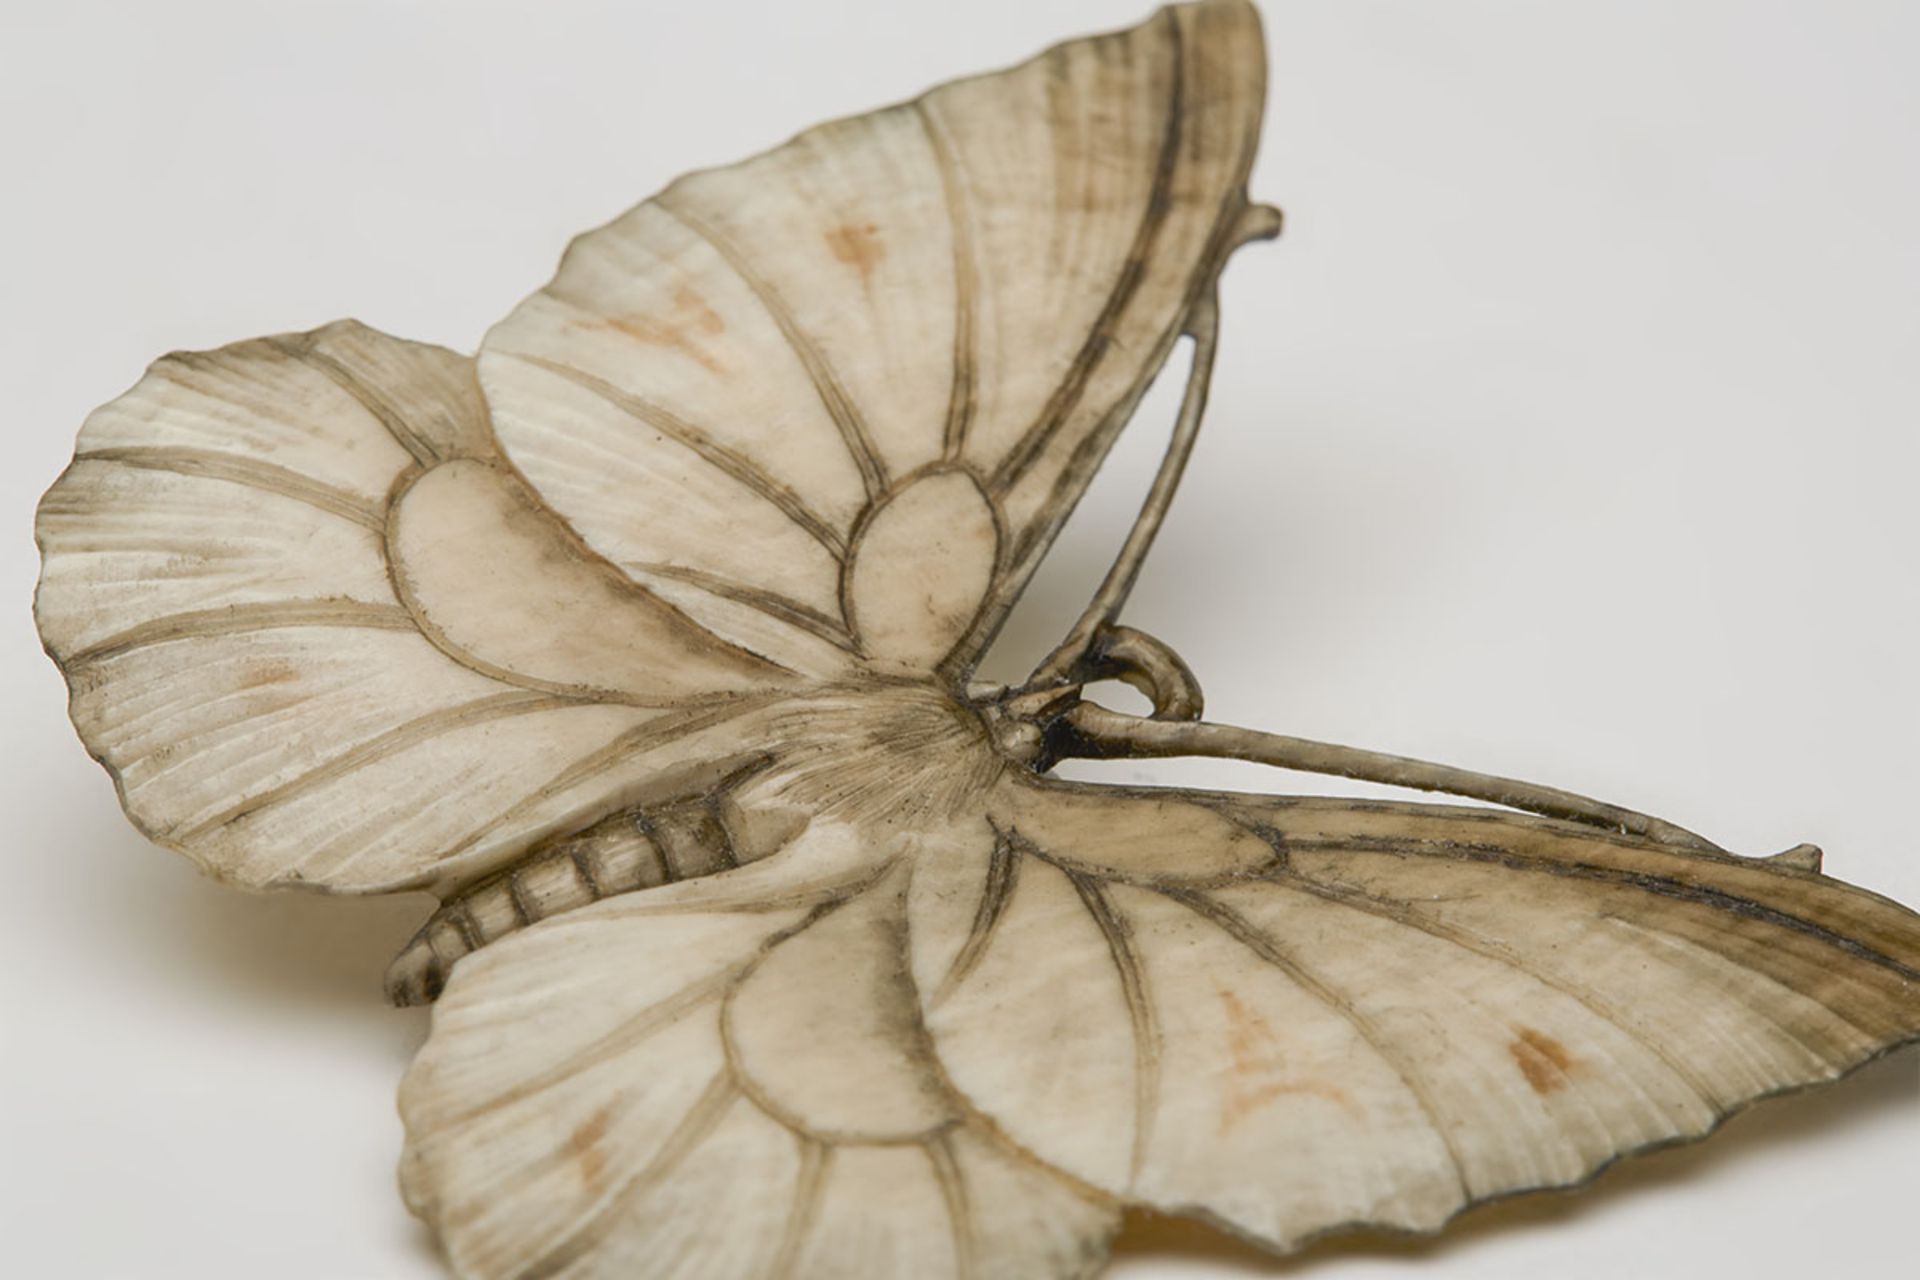 ANTIQUE CARVED IVORY BUTTERFLY PENDANT CHINESE? 19TH C. - Image 2 of 6